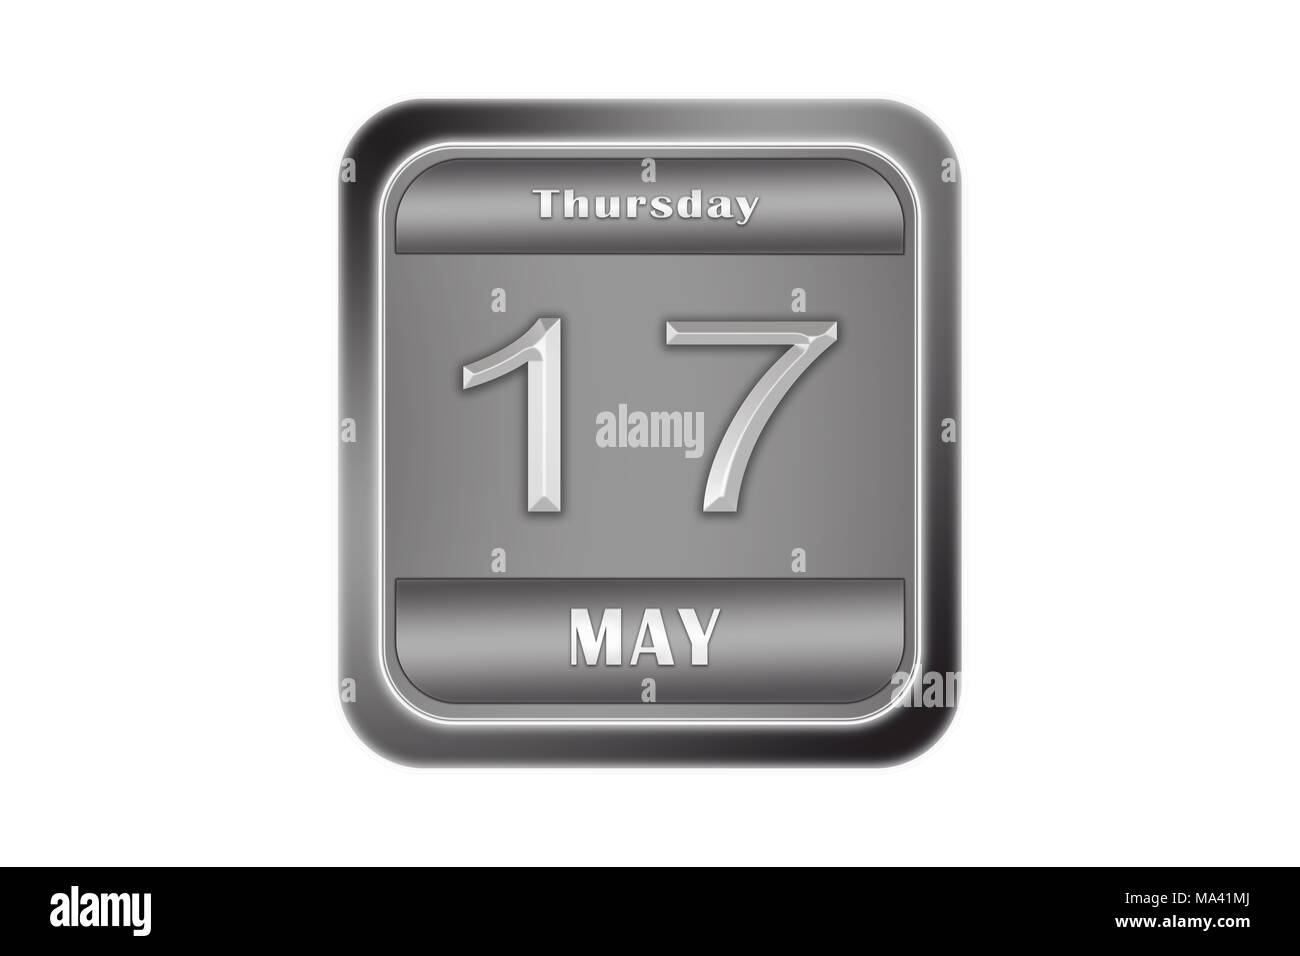 Date may 17, Thursday written on a metal plate Stock Photo